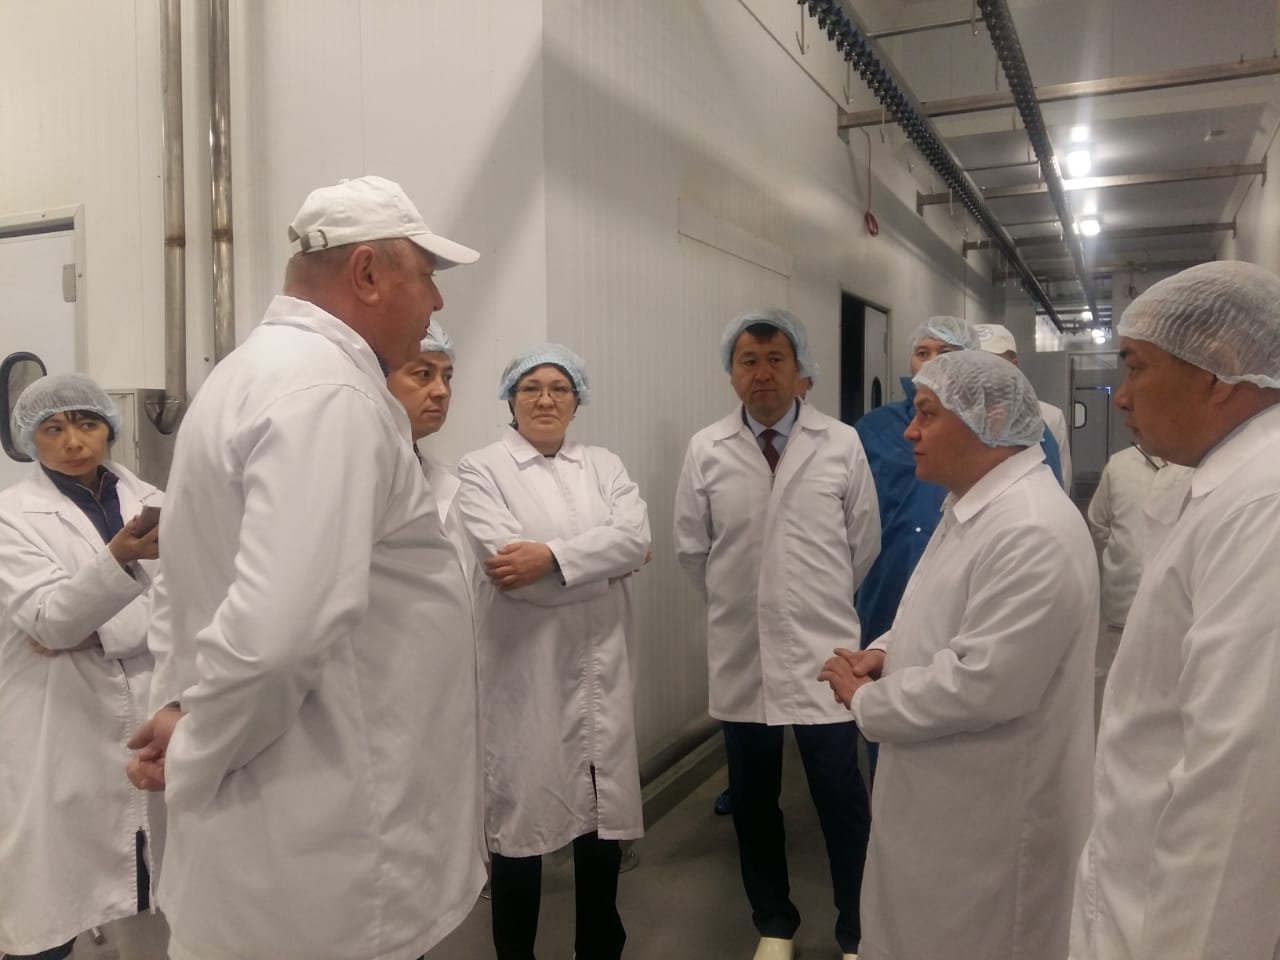 Visit of the Akim of Akmola Region to the Makinsk Poultry Farm 